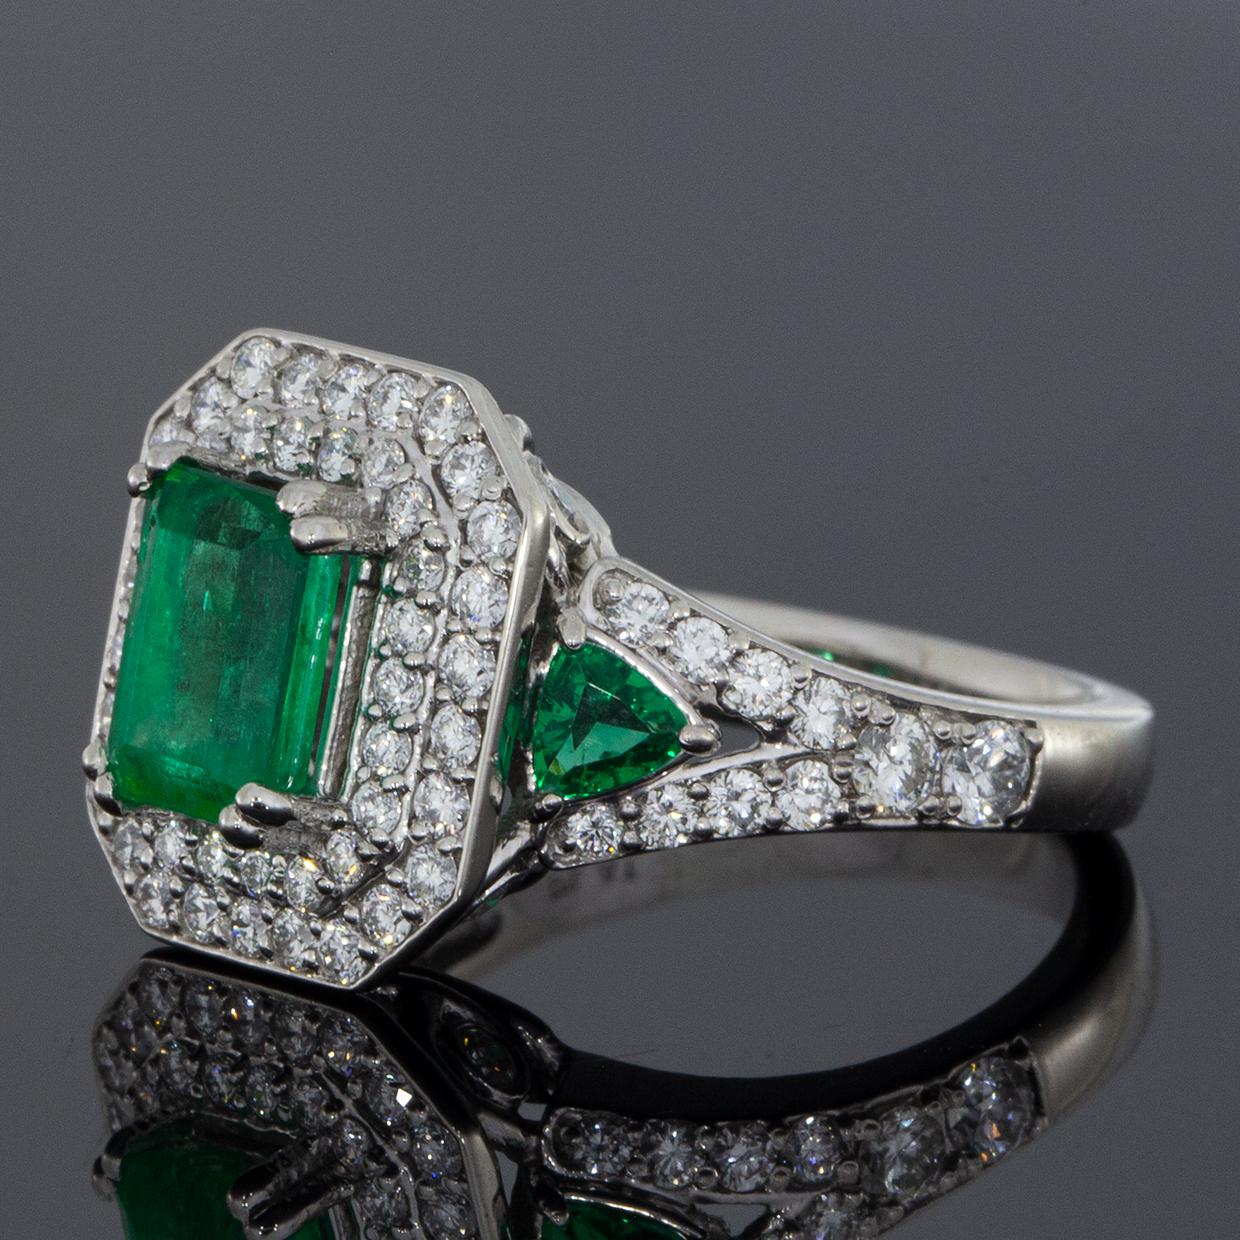 Item Details
Main Stone  Emerald Cut
Main Stone Weight 1.18 ct
Natural/Lab-Created Natural
Main Stone Emerald
Secondary Stone Emerald
Secondary Stone Weight0.30
Estimated Retail $12,000.00
Metal Platinum
Total Carat Weight (TCW) 2.68